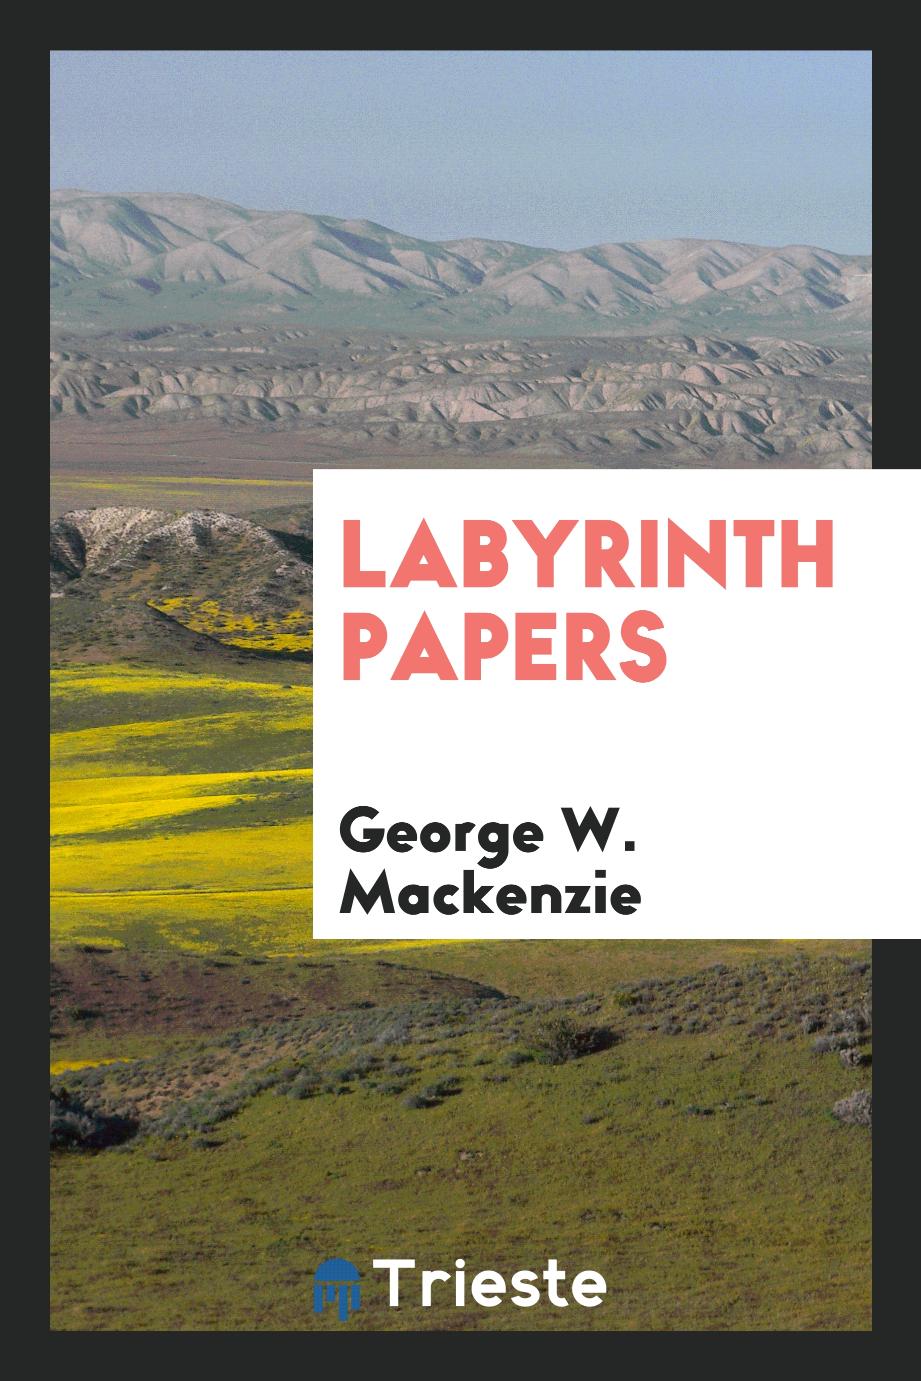 Labyrinth papers